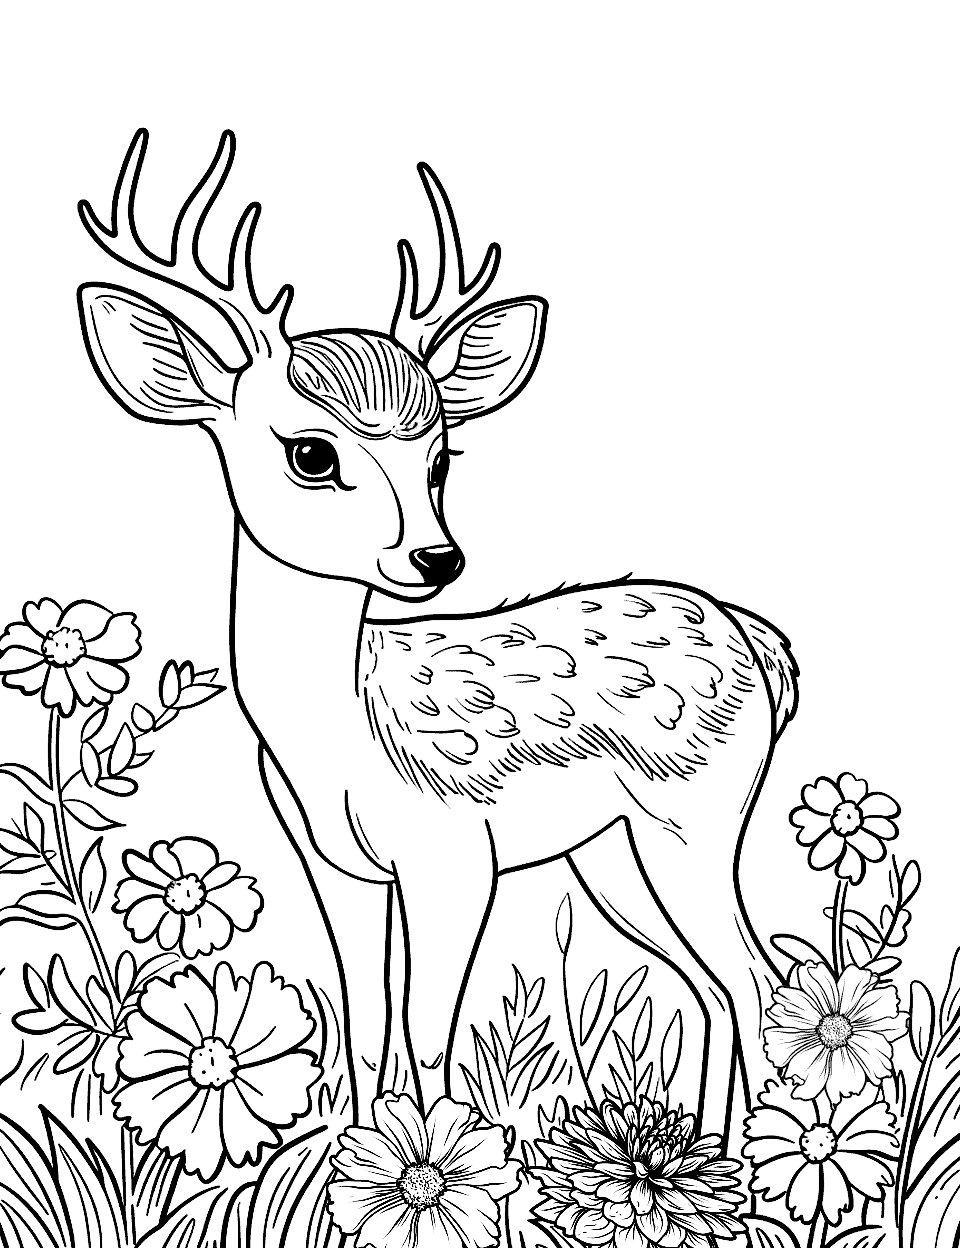 Cute Baby Deer in a Meadow Coloring Page - A small, adorable baby deer standing in a meadow full of flowers.